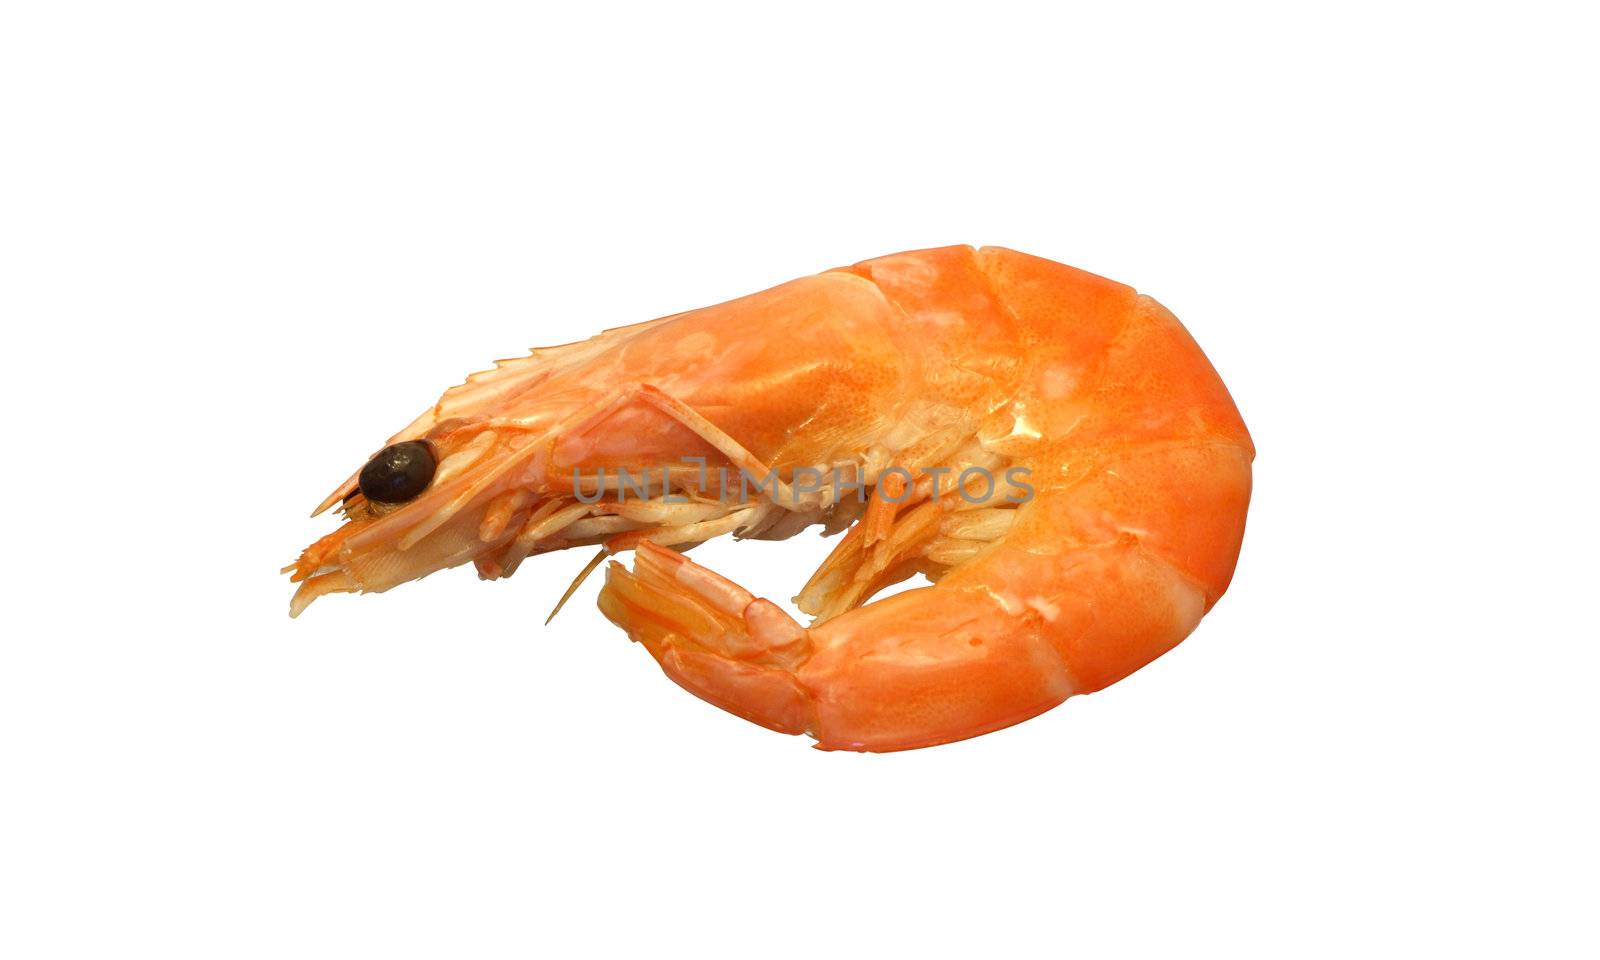 One cooked shrimp isolated on white background with clipping path